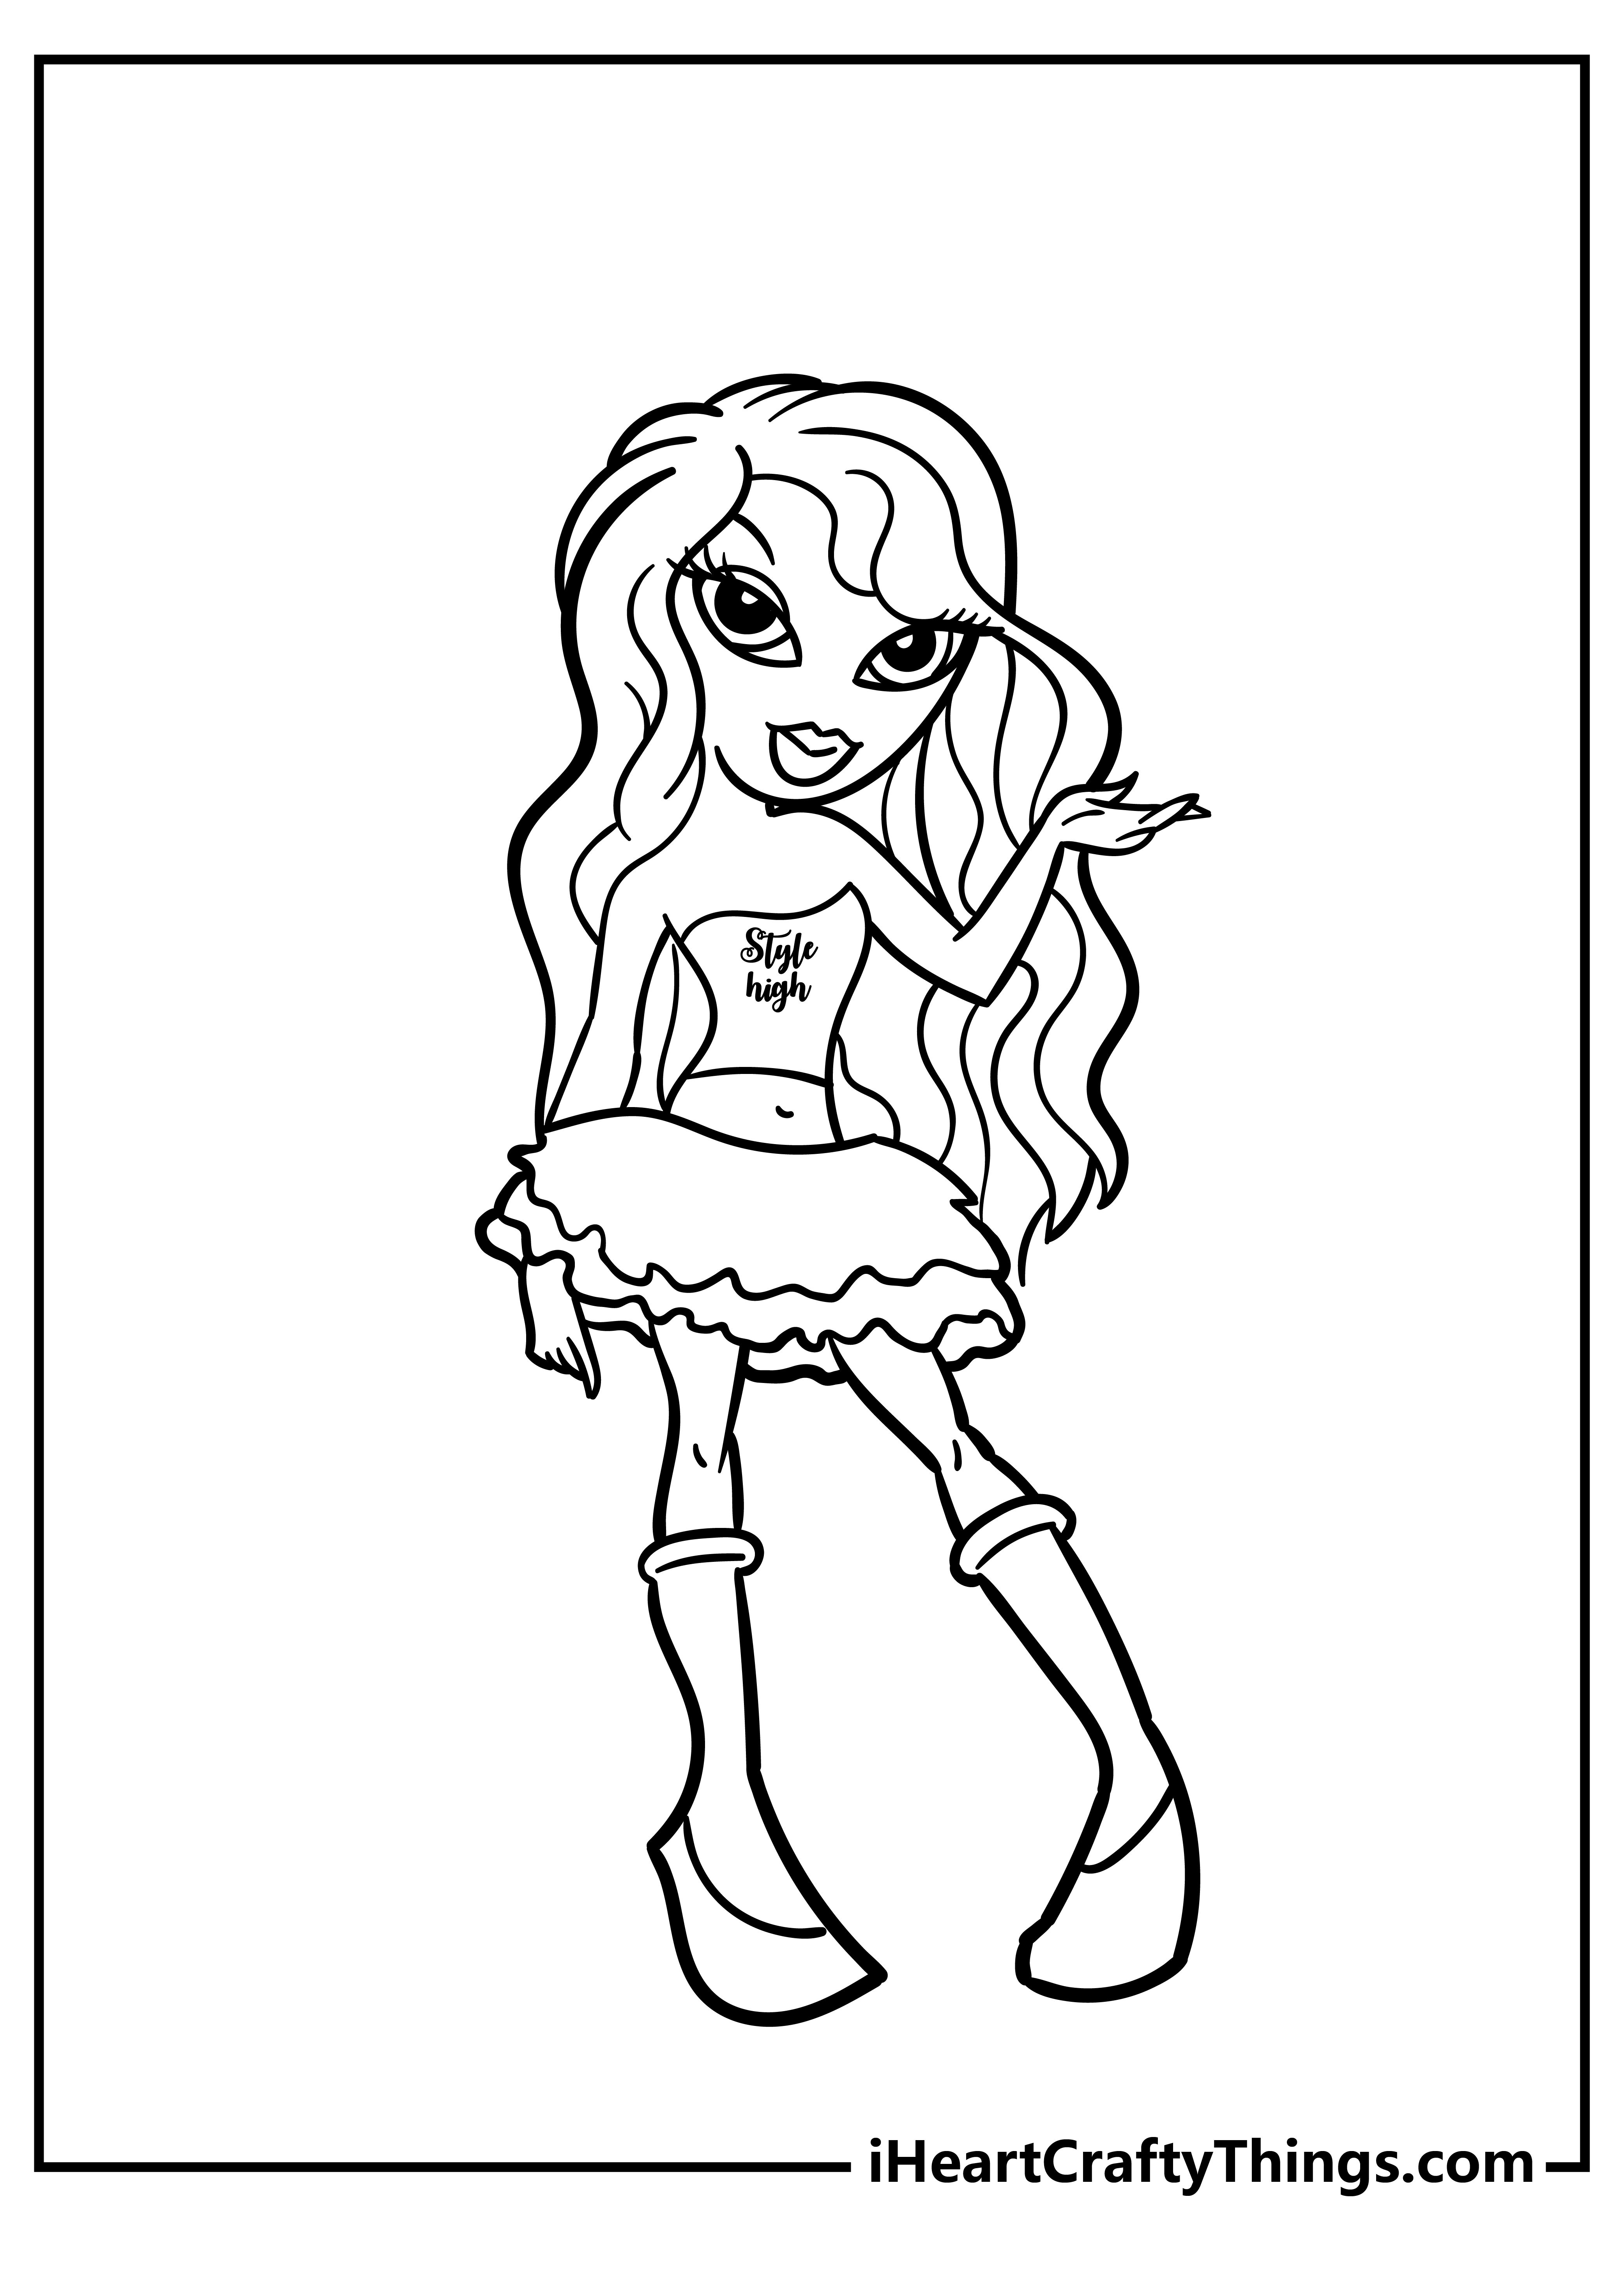 Bratz Coloring Book for adults free download